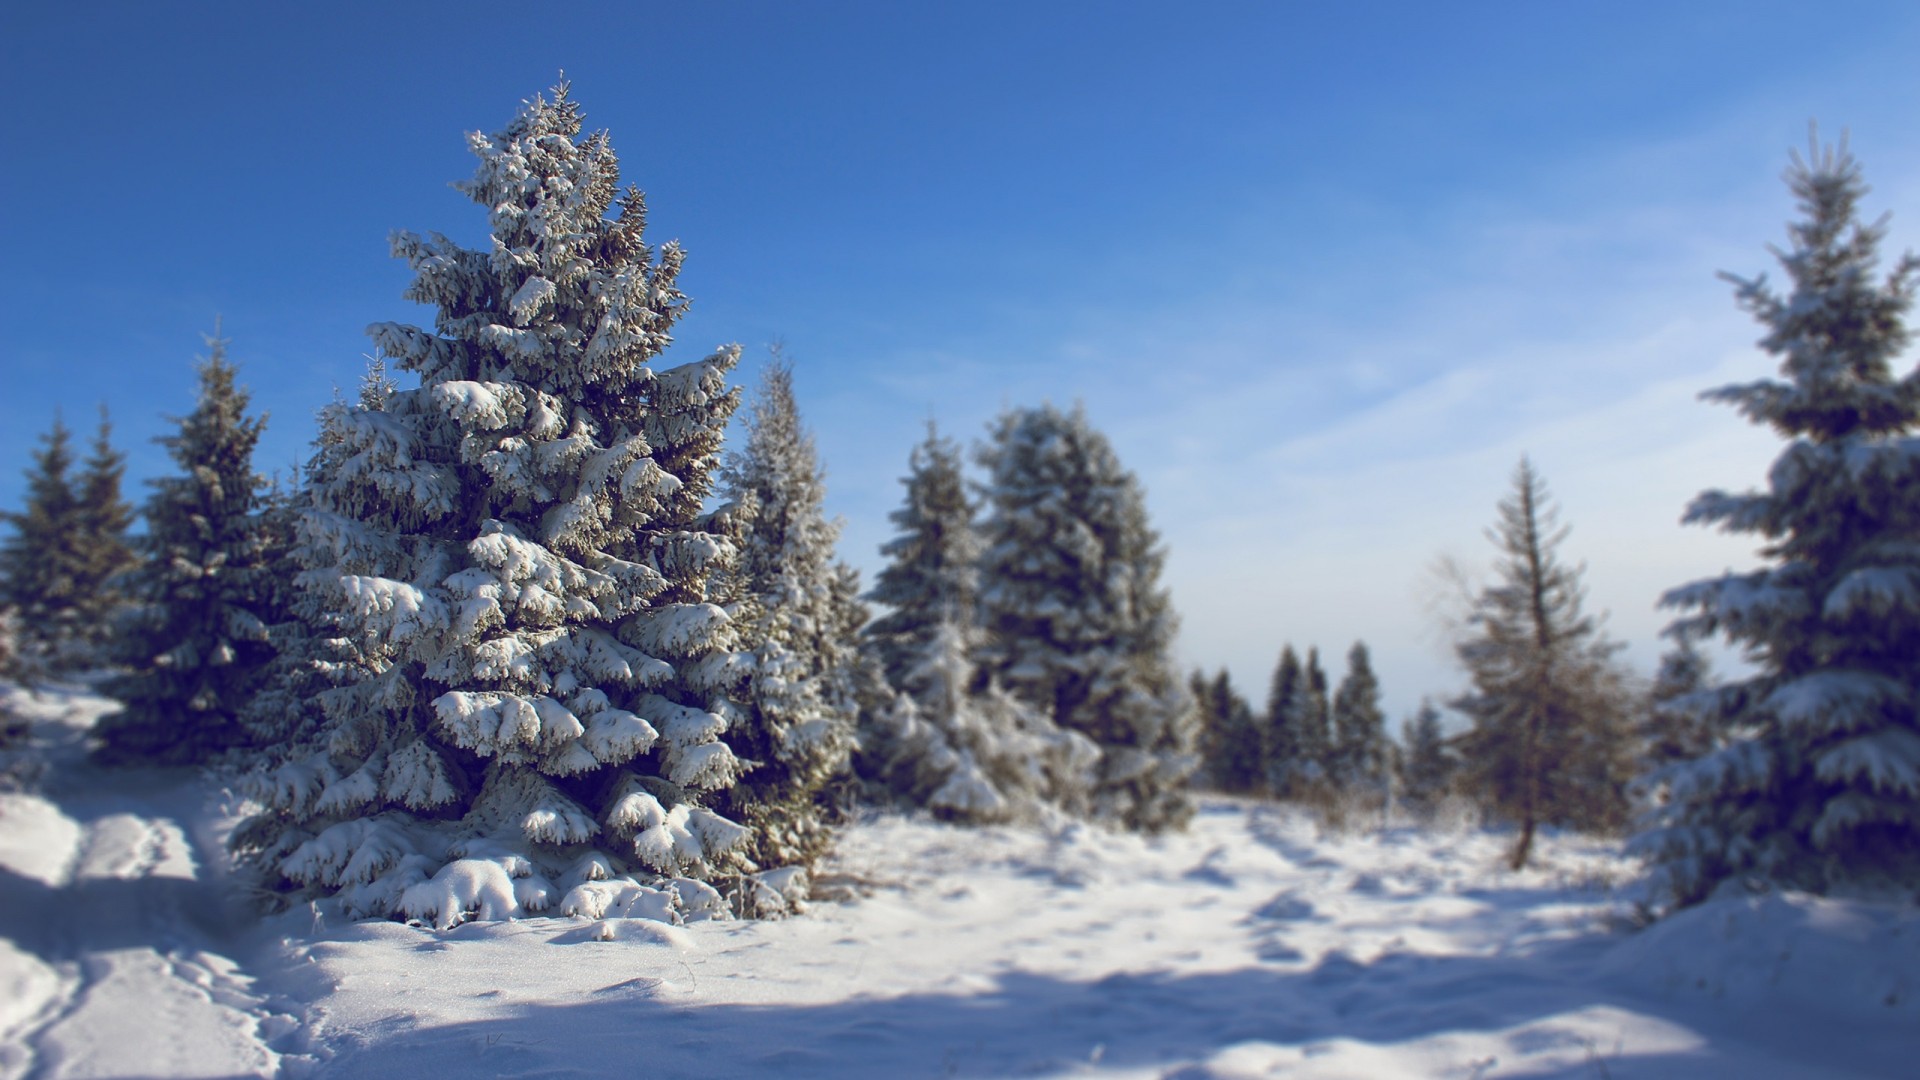 General 1920x1080 pine trees nature winter blurred cold ice snow outdoors trees